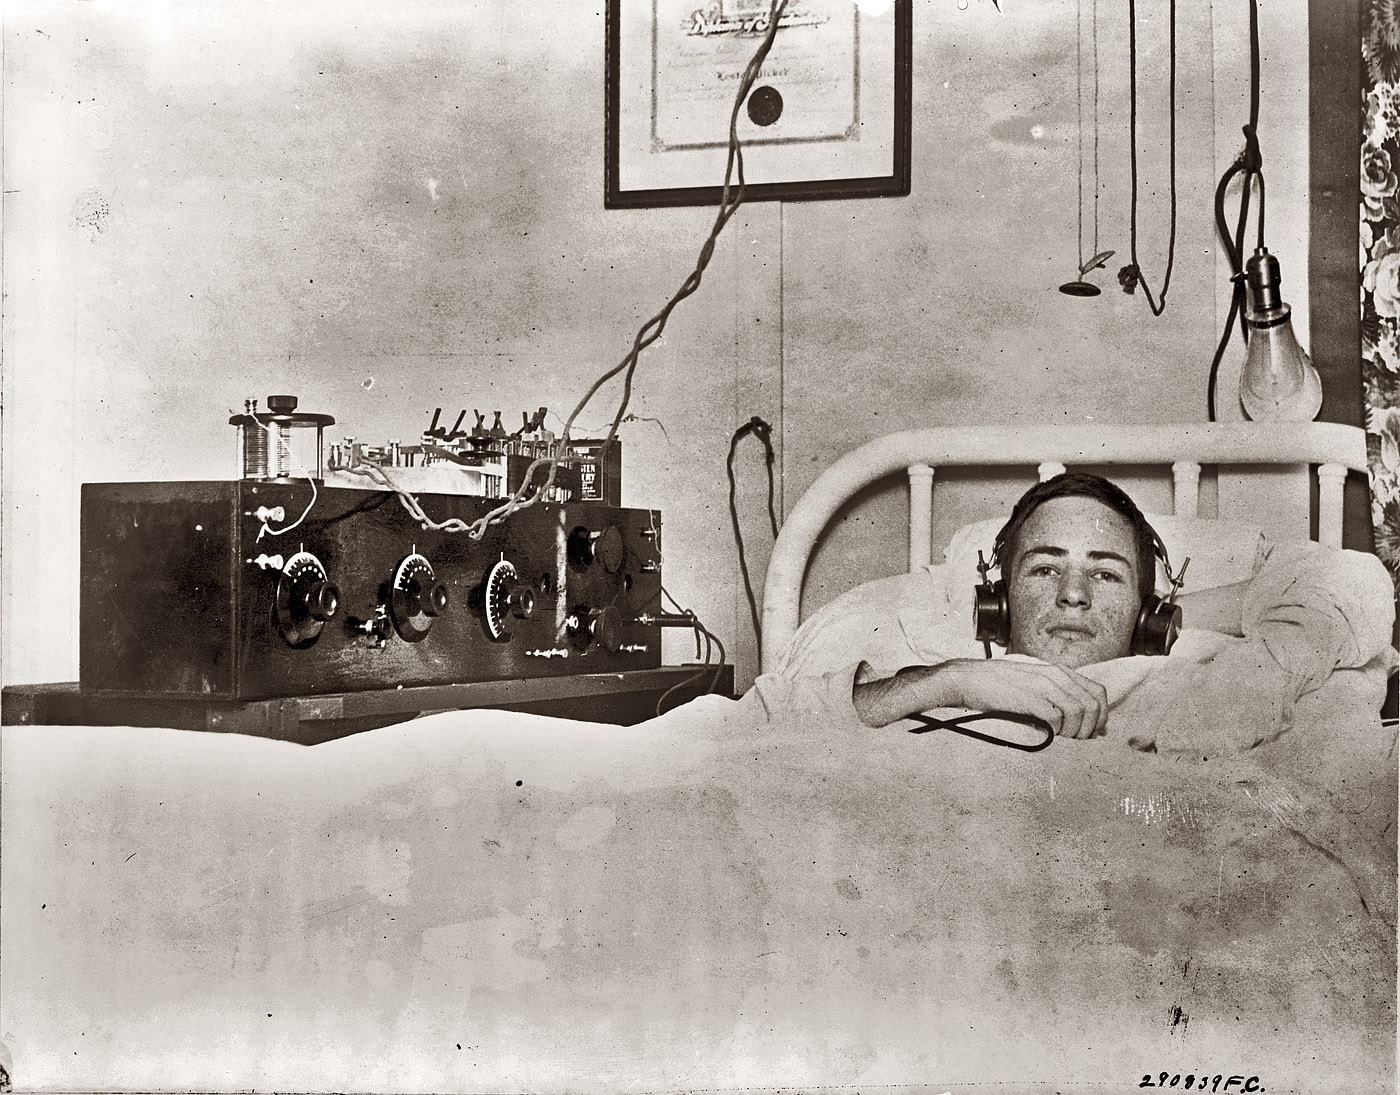 Lester Picker listens to his shortwave radio through earphones while convalescing after breaking his back when he fell 55 feet erecting an aerial for the radio. Photograph by Underwood & Underwood, April 18, 1922. View full size. (Updated with additional information on Lester — click here and scroll down.)